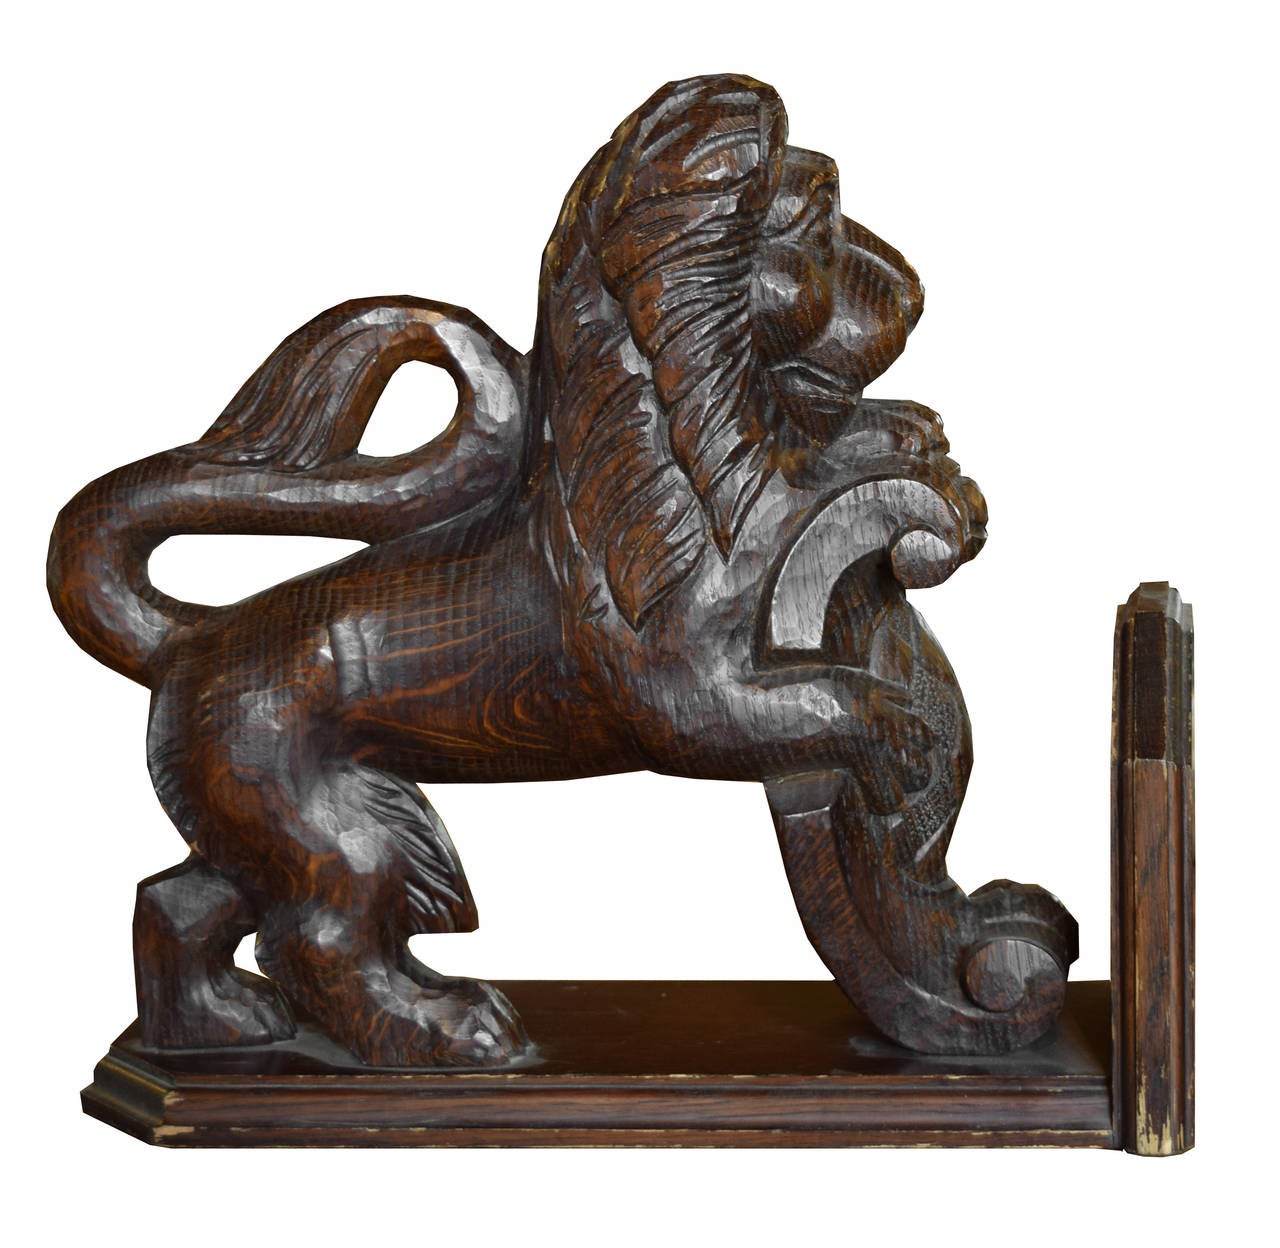 A pair of fantastically carved wood lion bookends from circa 1910 of great quality from Argentina.